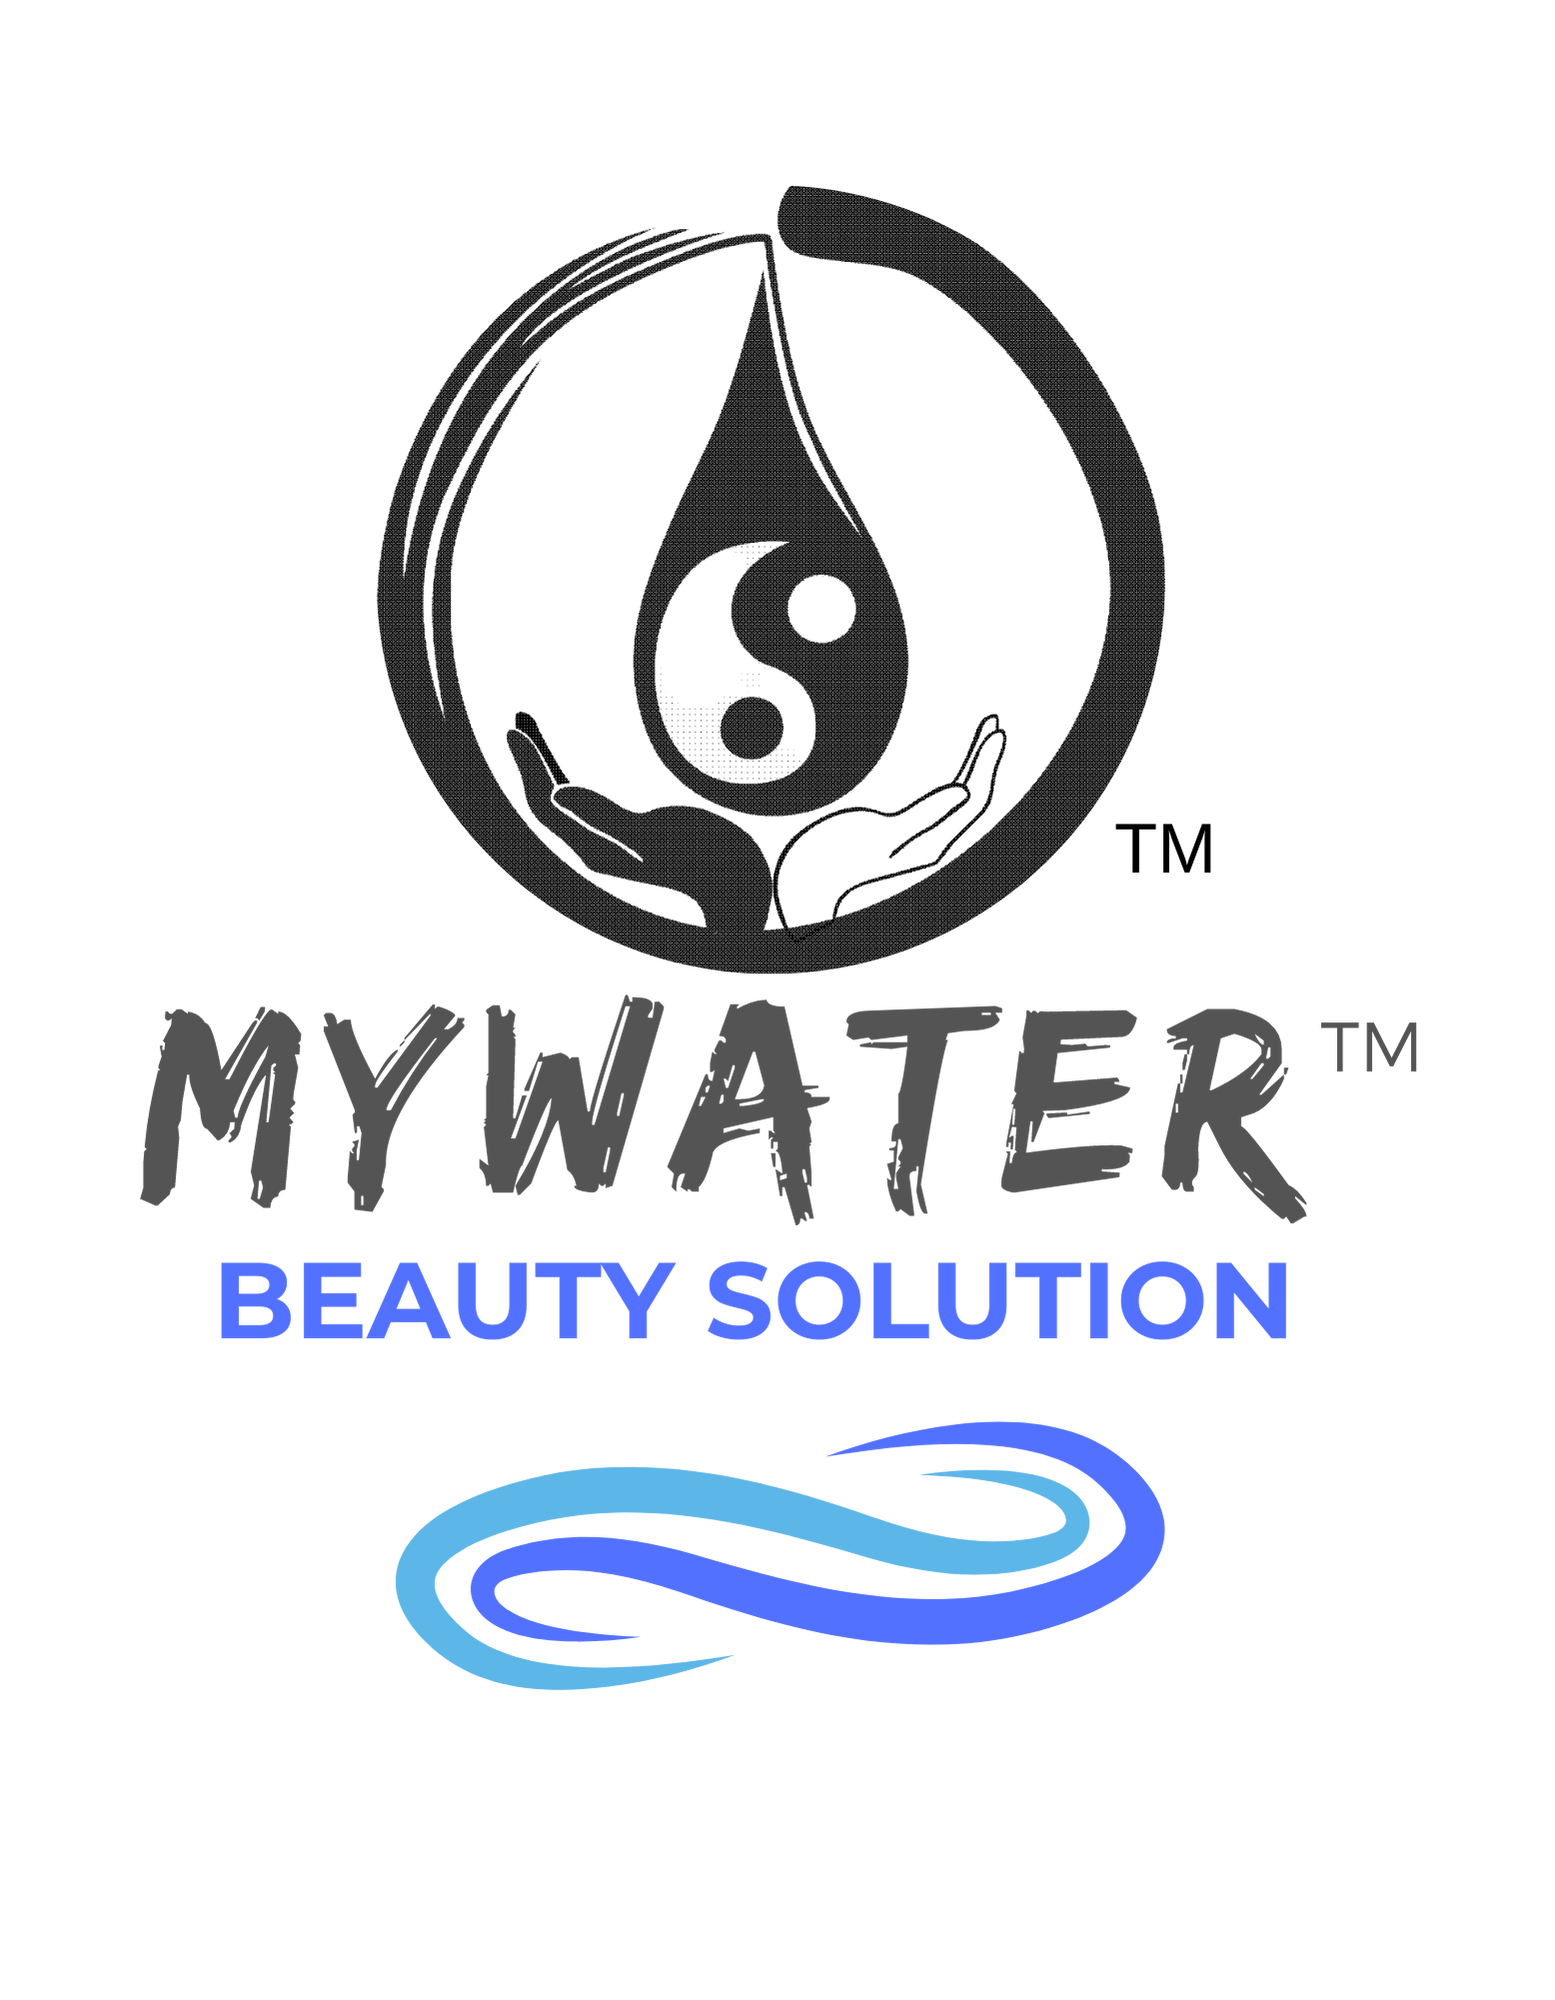 MyWater Beauty Solution